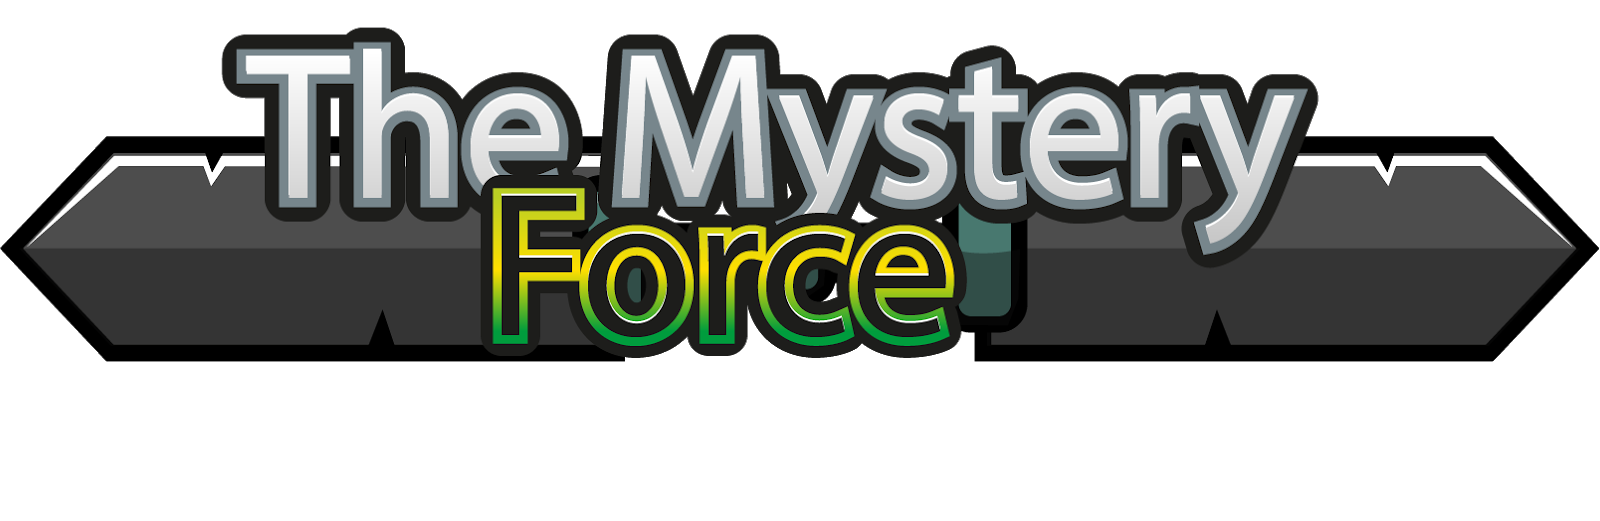 The Mystery Force